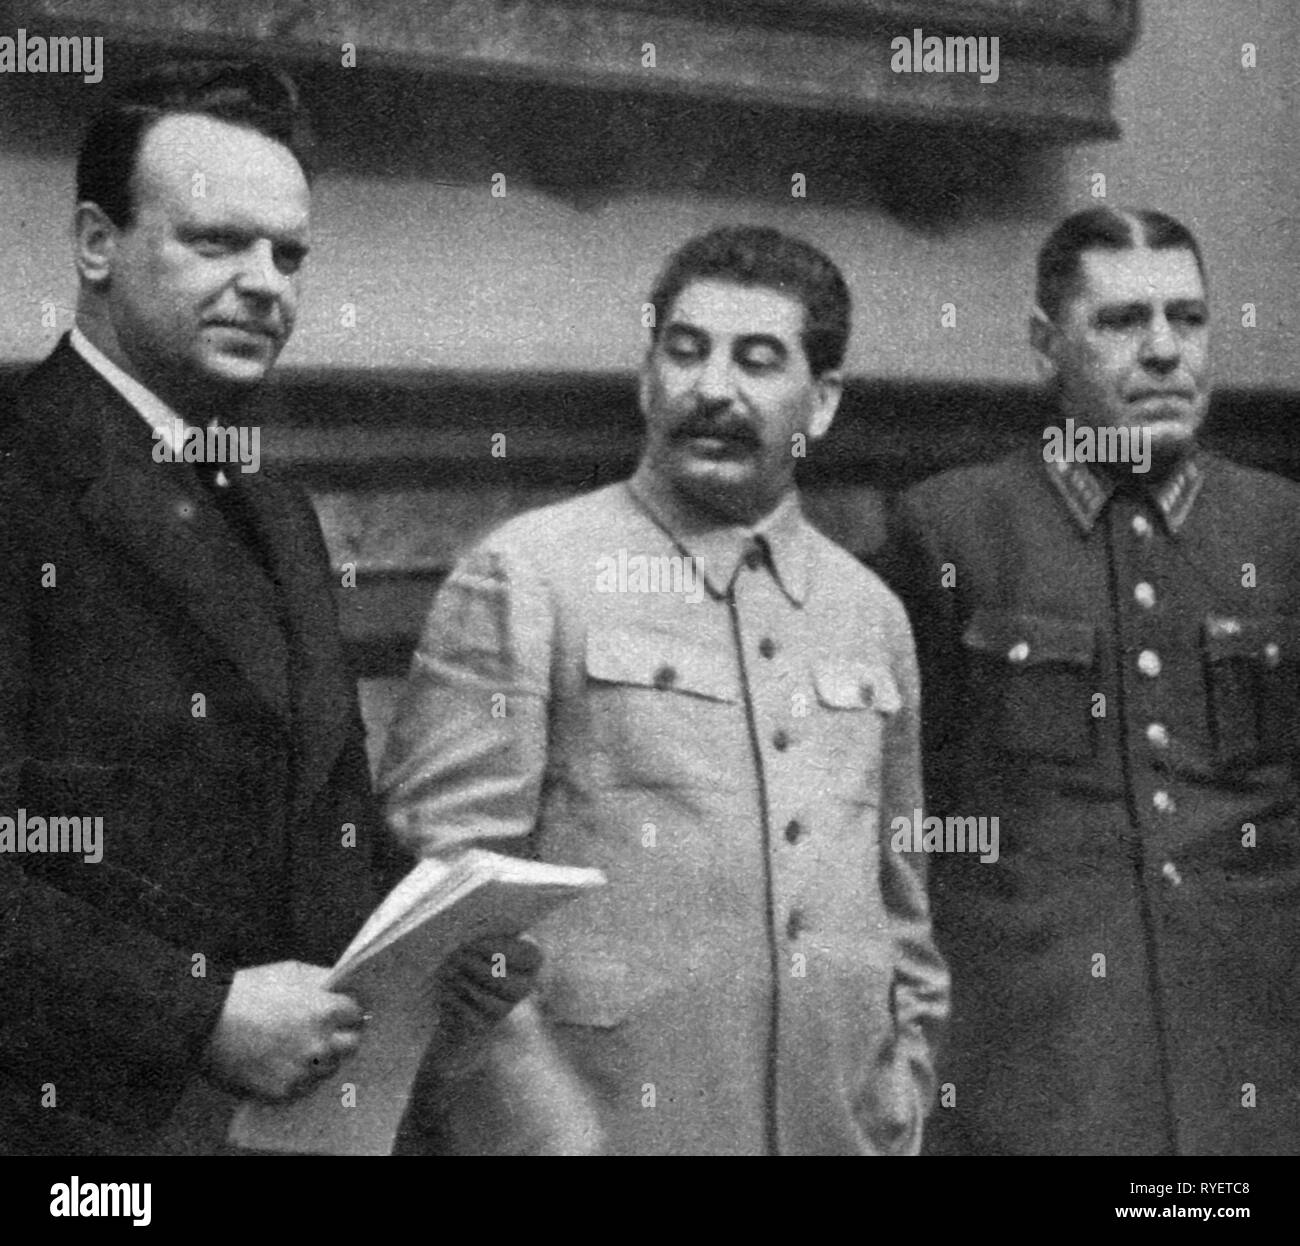 Nazism / National Socialism, politics, German-Soviet non-aggression treaty, 1939, from the left: the Soviet ambassador in Germany Aleksey Shkvarzev, secretary-general the CPSU Joseph Stalin and Chief of General staff general Boris Shaposhikov after the signing, Moscow, 24.8.1939, German Soviet, Hitler - Stalin - pact, Ribbentrop Molotov Pact, Ribbentrop - Molotov - pact, Molotov-Ribbentrop Pact, diplomacy, foreign policy, external policy, Russia, Soviet Union, USSR, Union of Socialist Soviet Republics, Germany, German Reich, Third Reich, people, , Additional-Rights-Clearance-Info-Not-Available Stock Photo